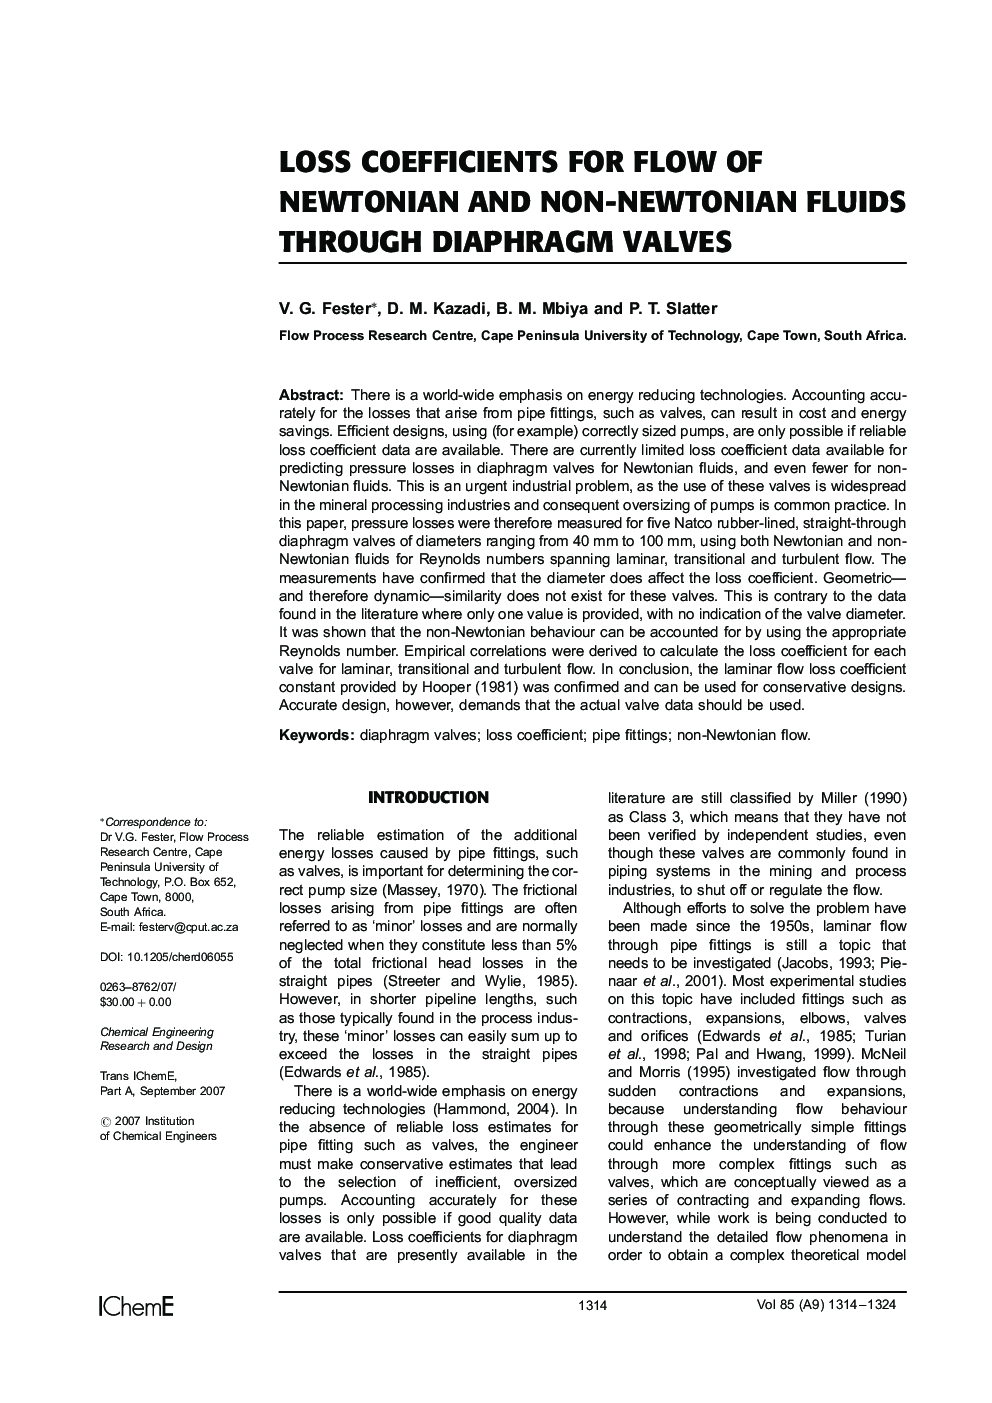 Loss Coefficients for Flow of Newtonian and Non-Newtonian Fluids Through Diaphragm Valves